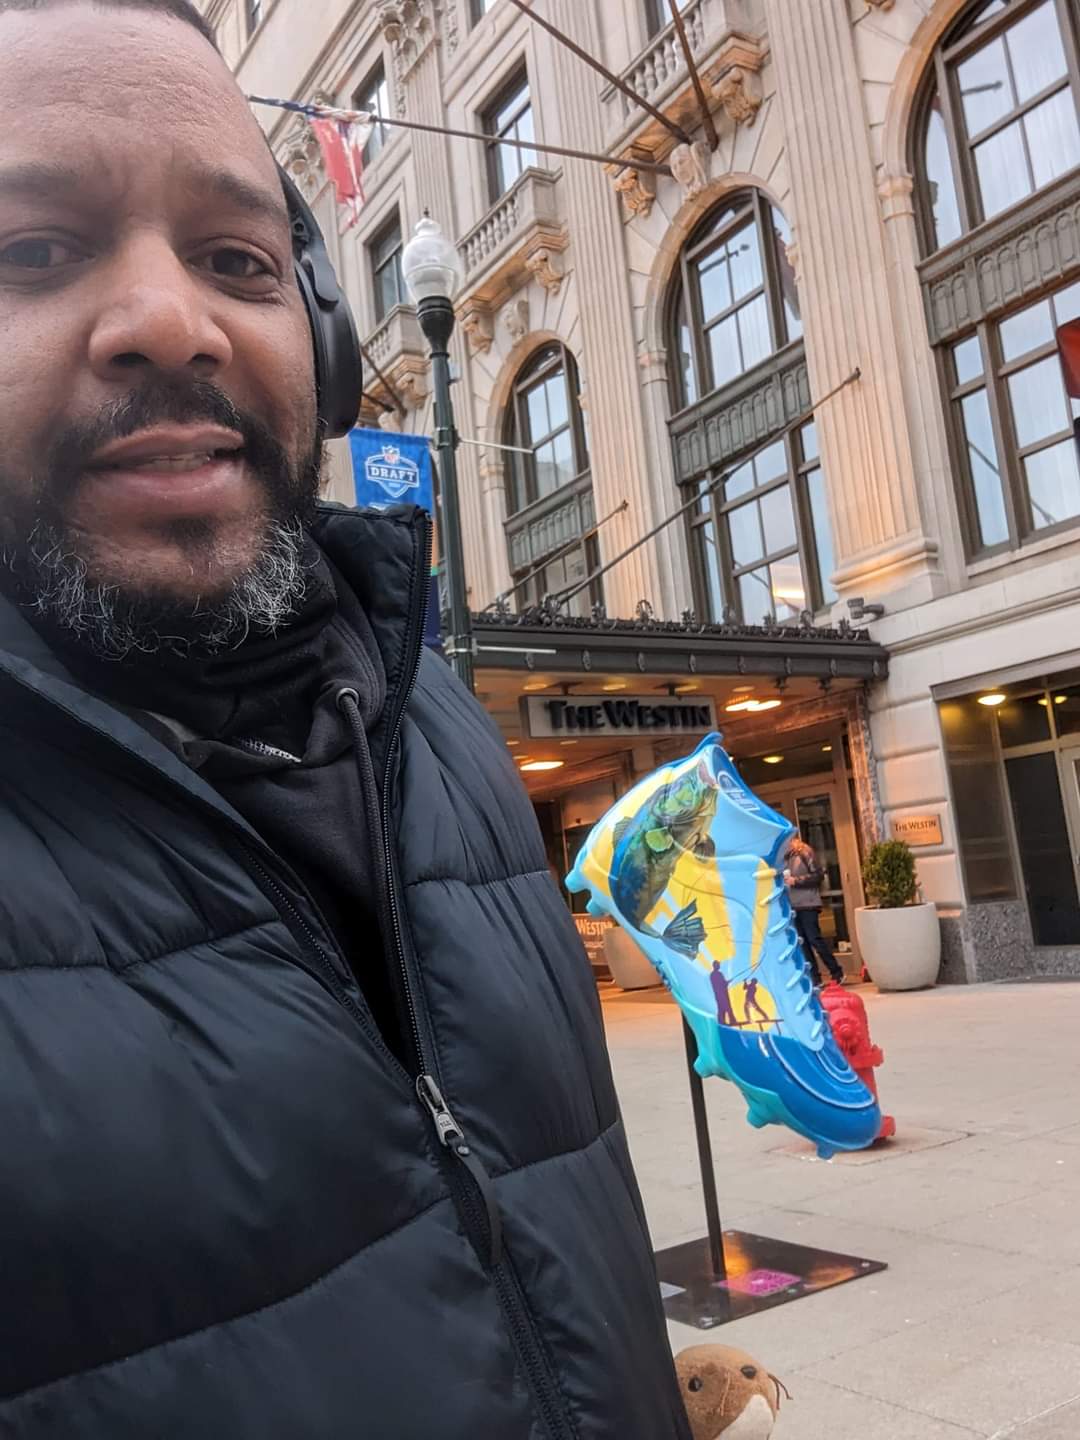 During April, Ed Cliett's feet and his city pride brought him to The Westin Book Cadillac Detroit hotel where he spent time with the DECLEATED artwork created by Wendy Popko,